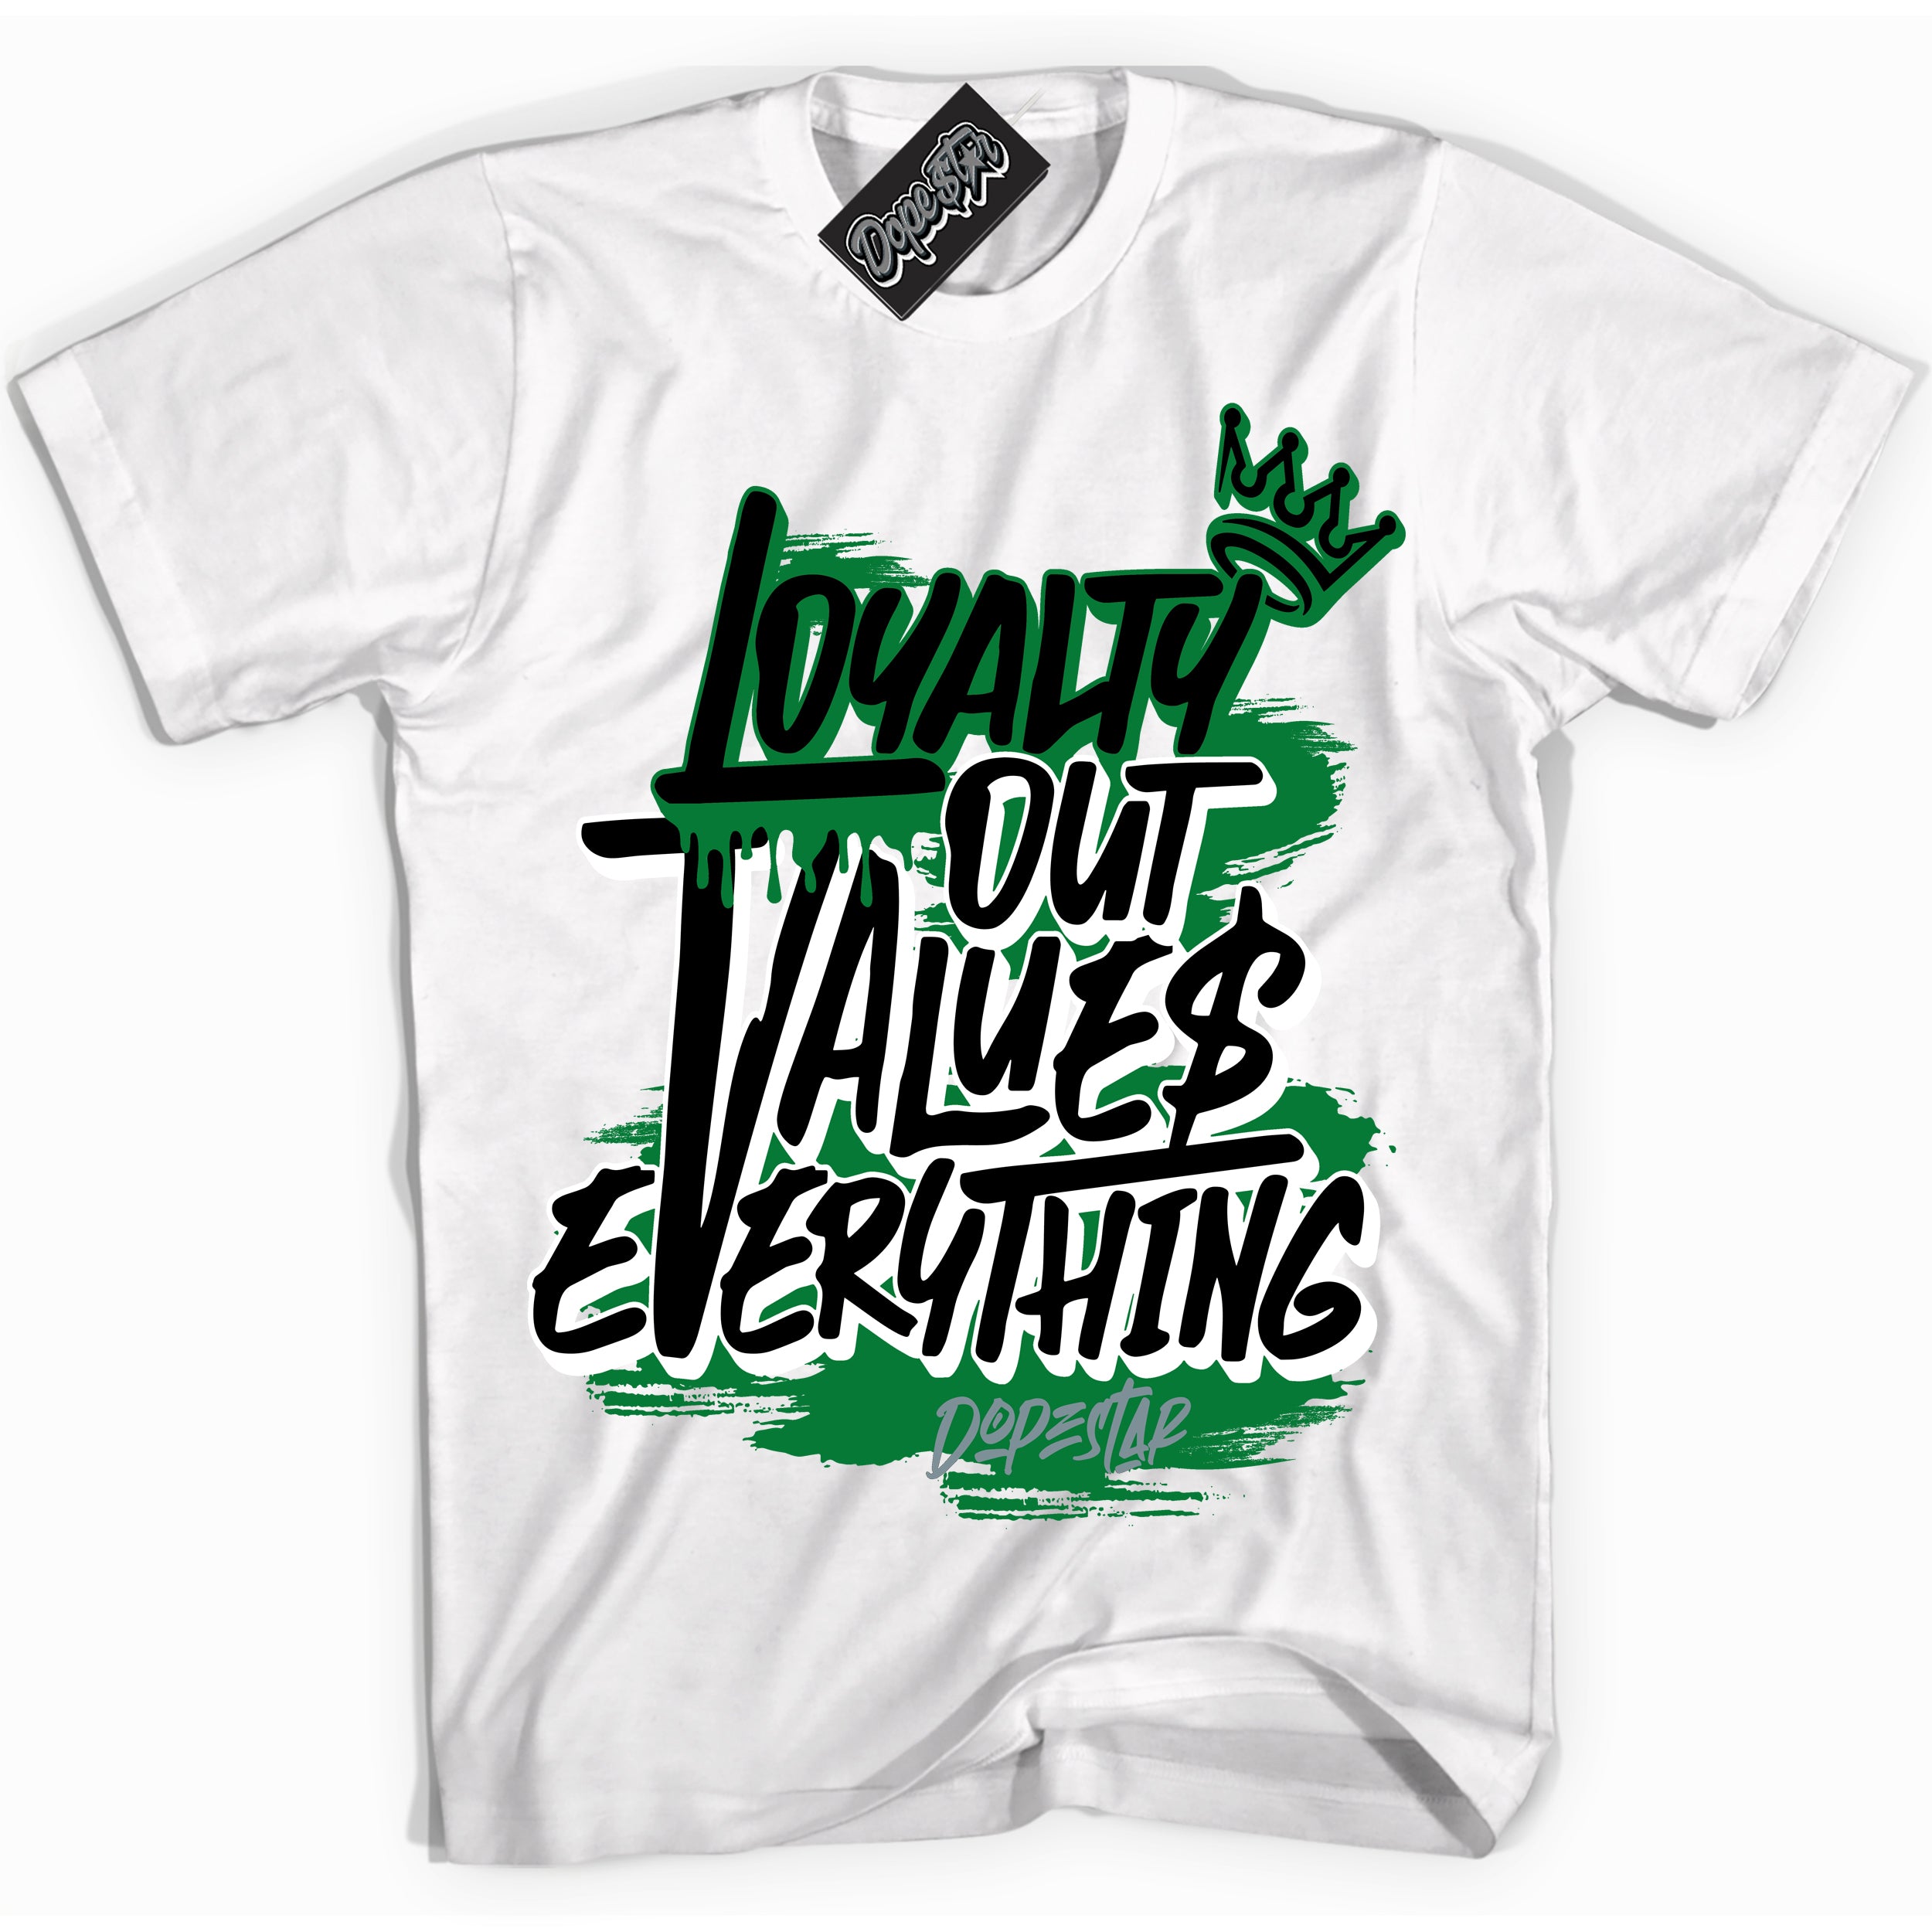 Cool White Shirt with “ Loyalty Out Values Everything” design that perfectly matches Lucky Green 5s Sneakers.